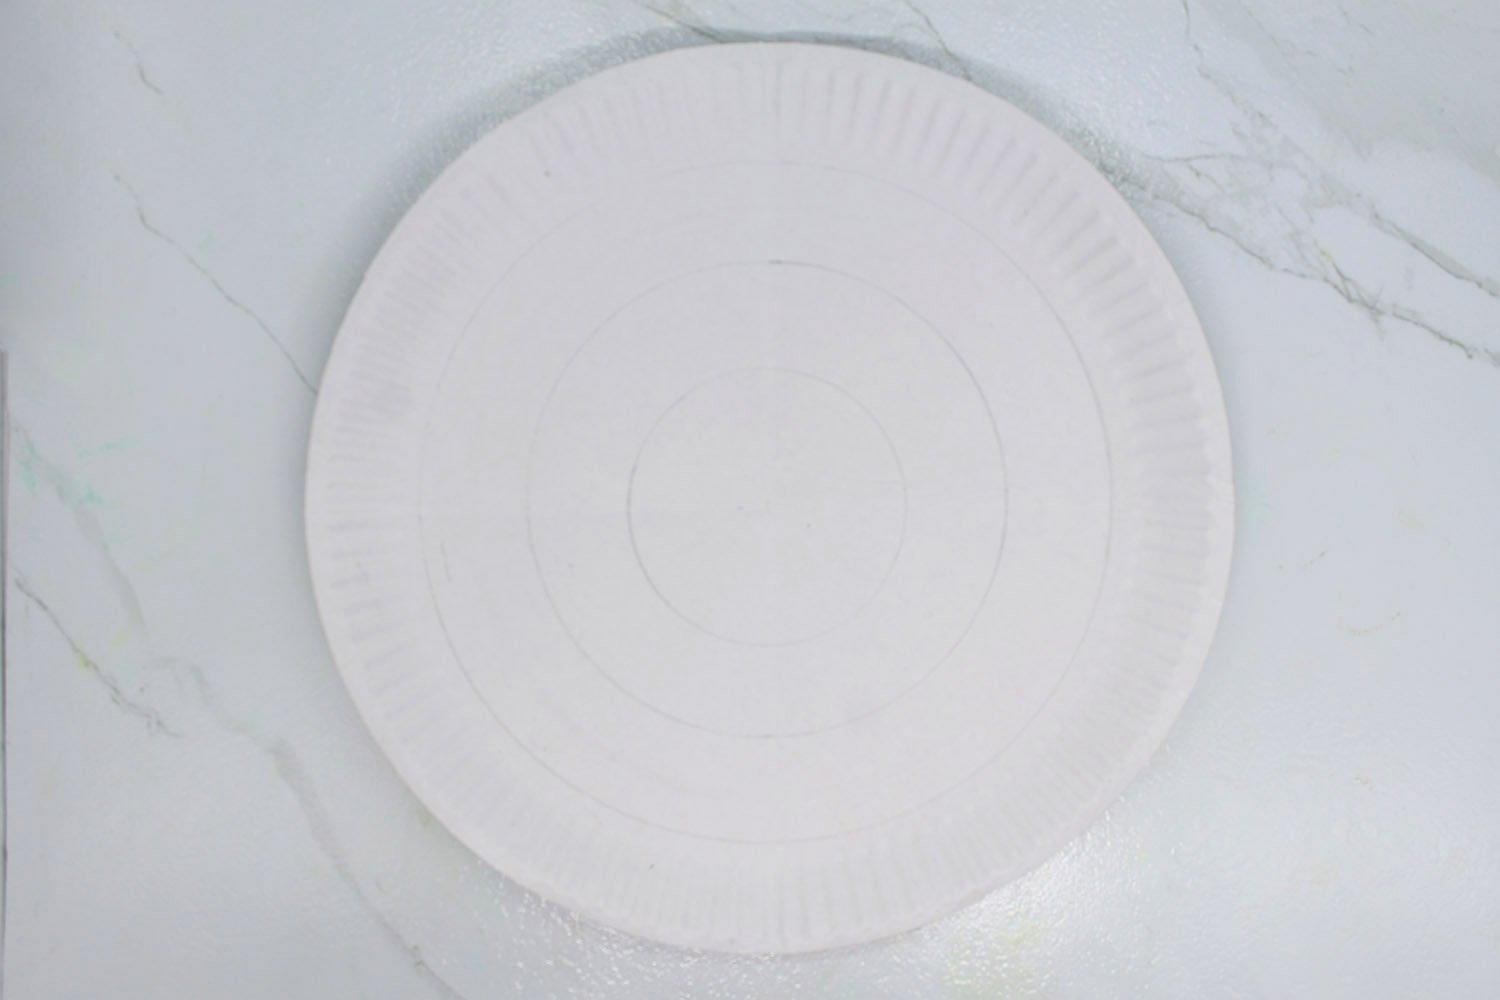 How to Make a Paper Plate Earth - Step 02